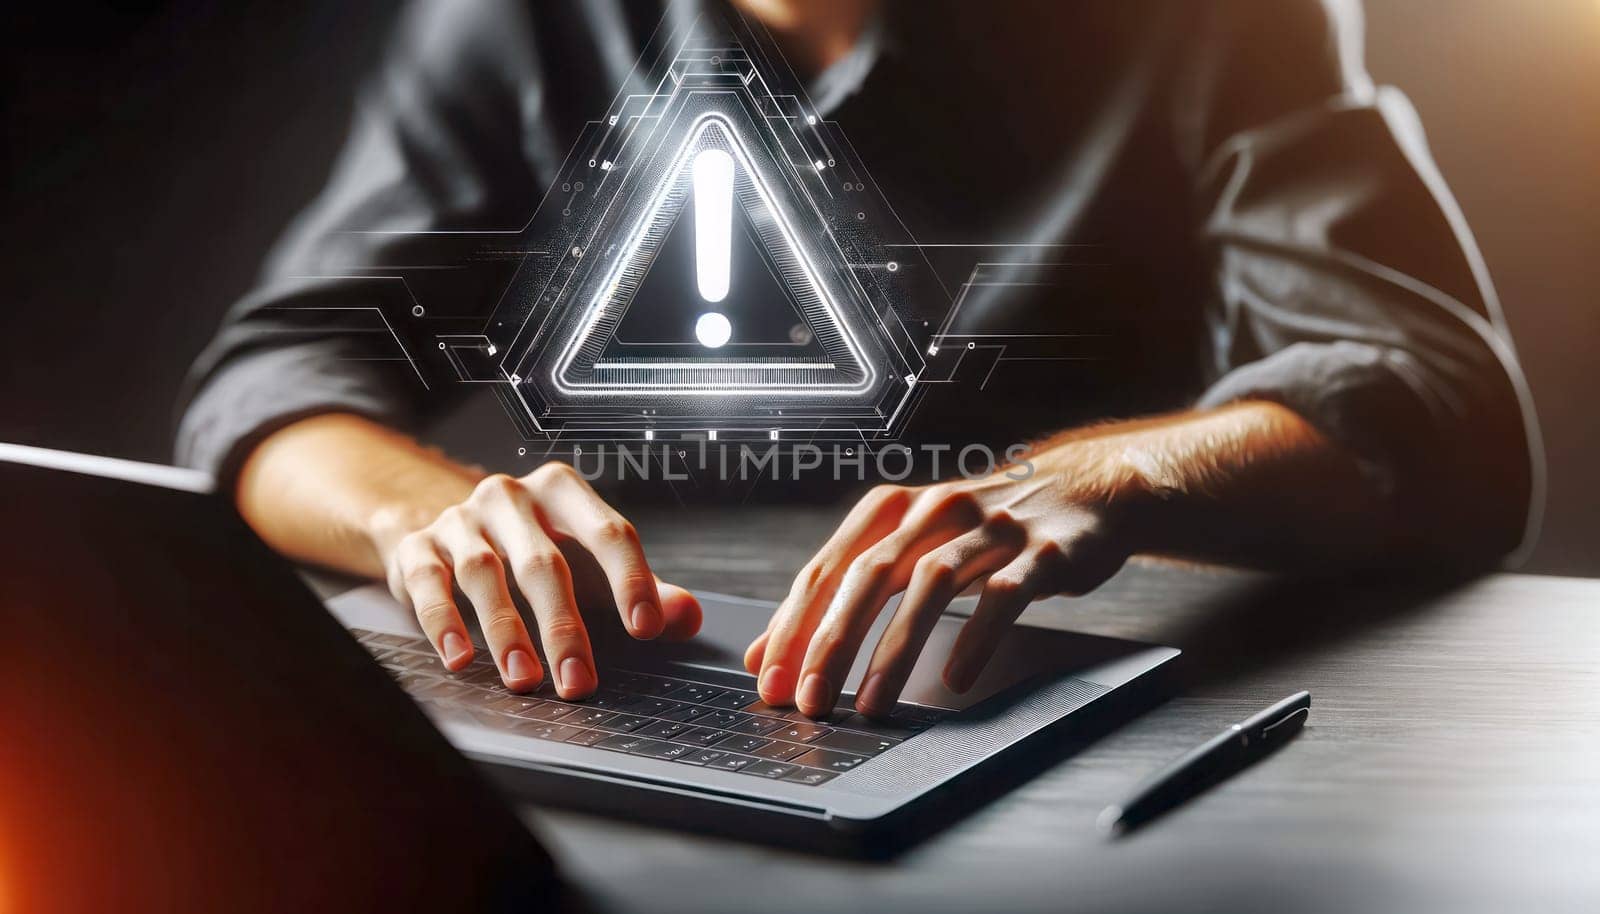 A digital illustration of a person's hands typing on a laptop keyboard. The person is wearing a dark, collared shirt. The laptop is modern and sleek with a black color scheme. A graphical overlay of a white exclamation mark inside a triangle is floating above the laptop, suggesting an alert or warning sign. The image is taken from a side perspective, focusing on the hands and the laptop in a dark room with a soft focus background.